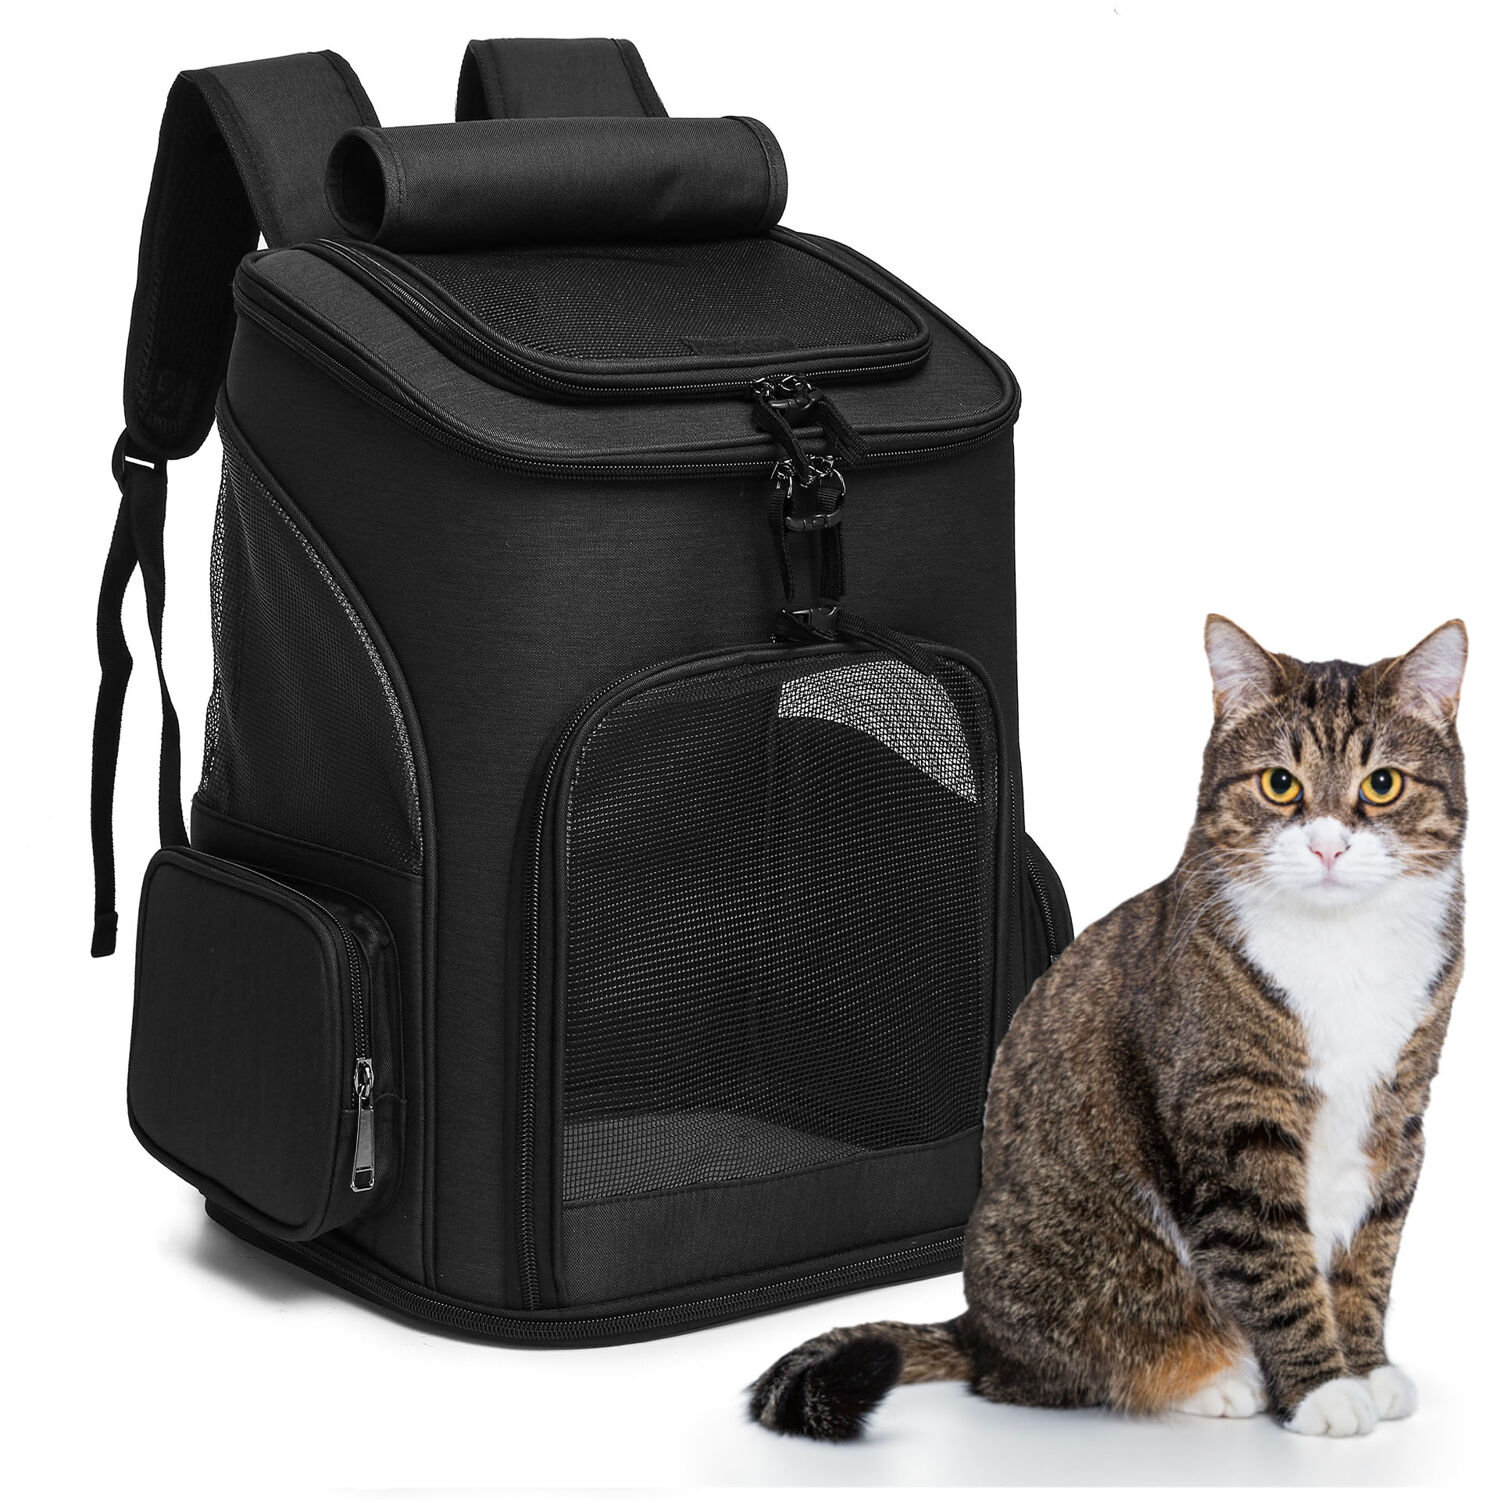 Amazon.com: Pet Carrier, Dog Carrier, Cat Carrier for Small Medium Pet,  Puppy Carrier Bag for Pets Up to 16 Lbs, Travel Kitty Carrier Soft with  Sturdy,Soft Sided,Foldable,Well-Ventilated,Cozy, Collapsible : Everything  Else